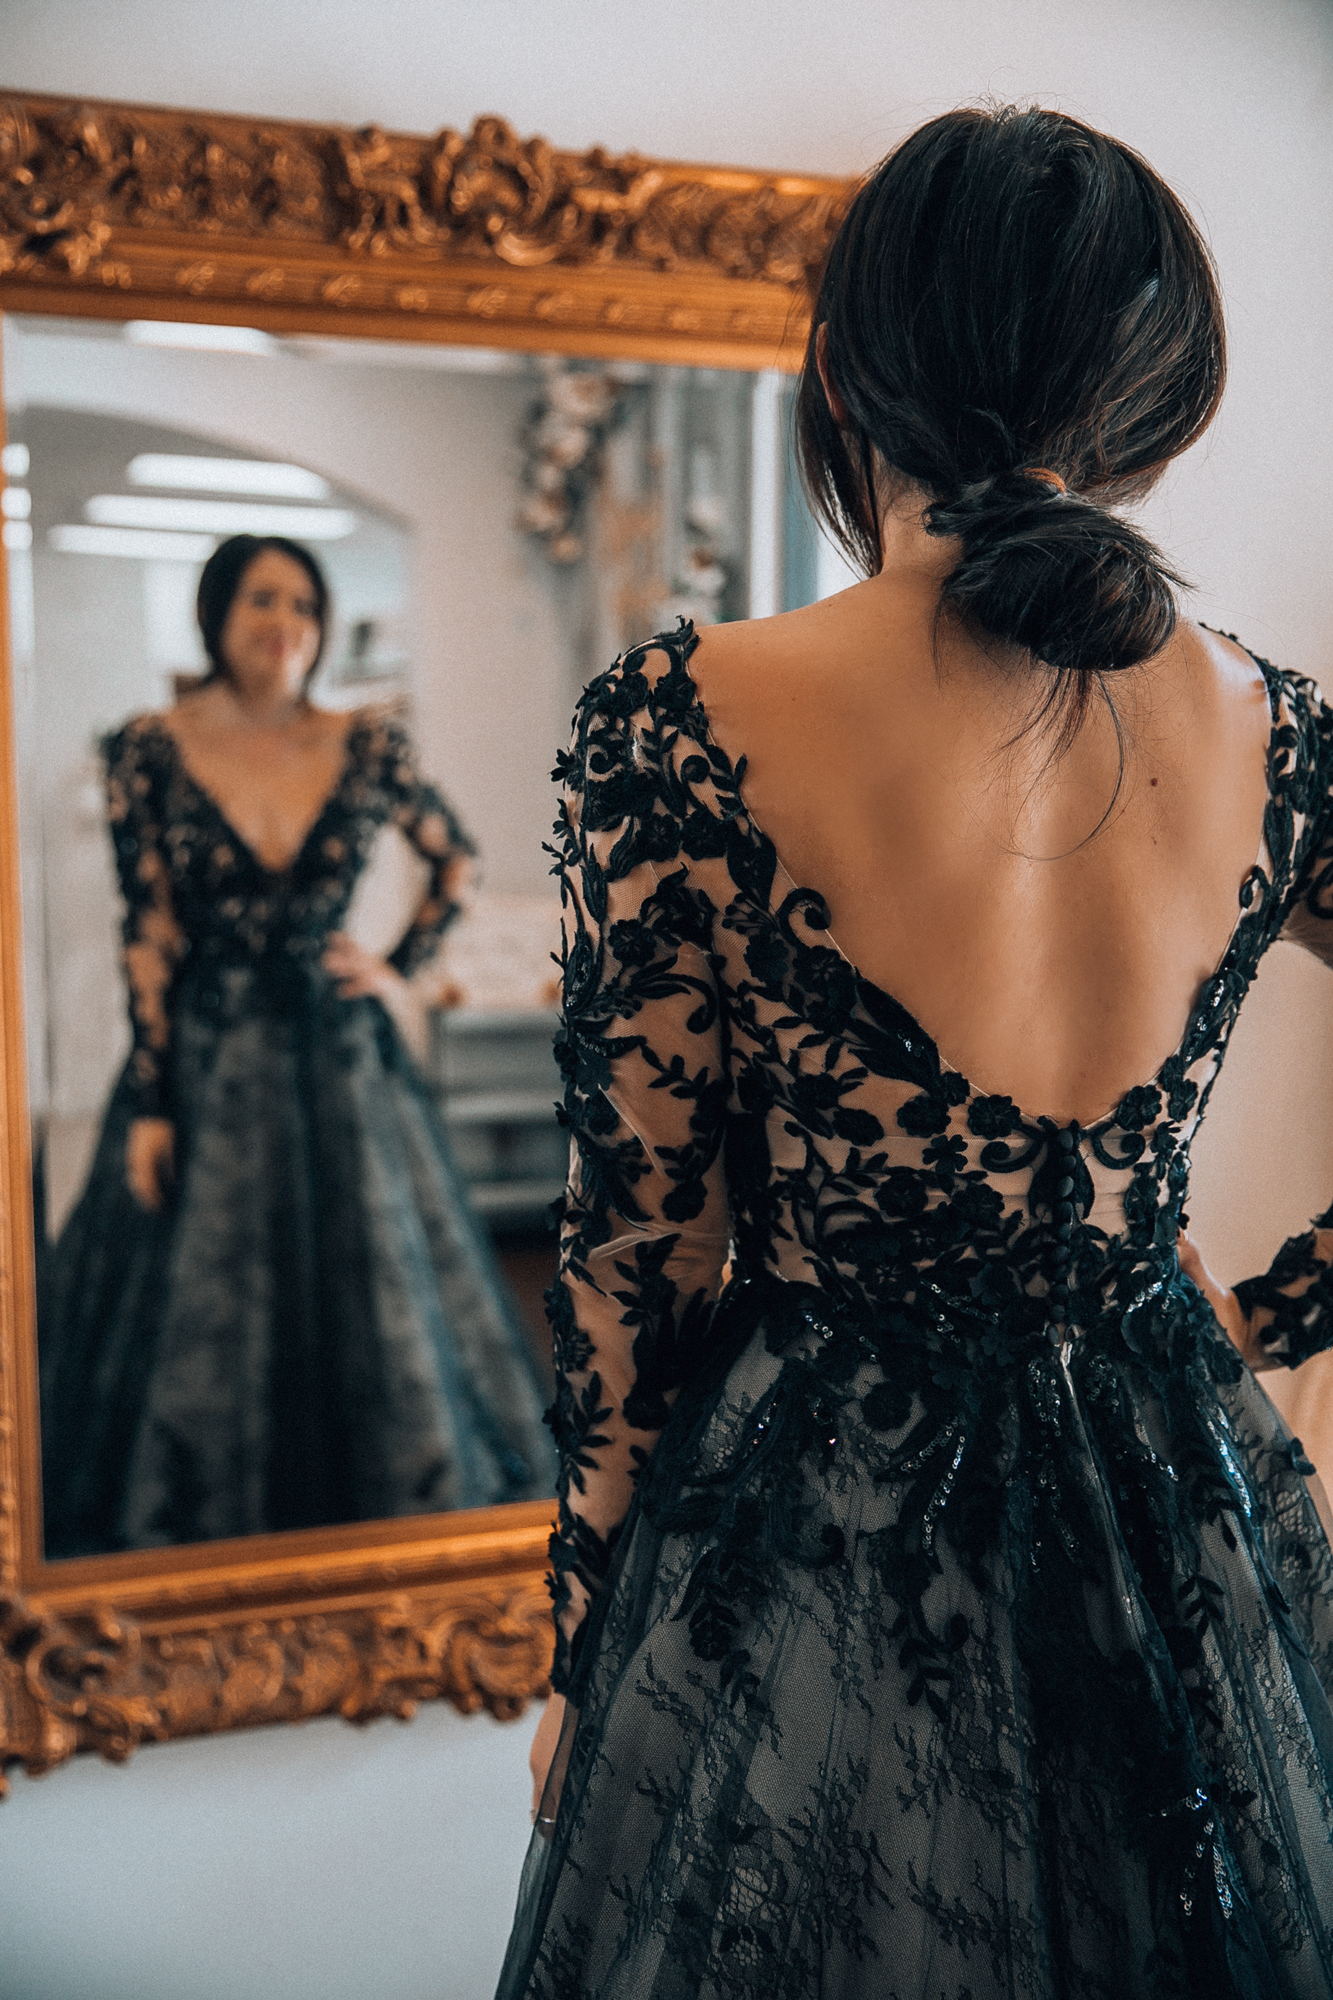 2021: THE YEAR OF THE BLACK WEDDING DRESS